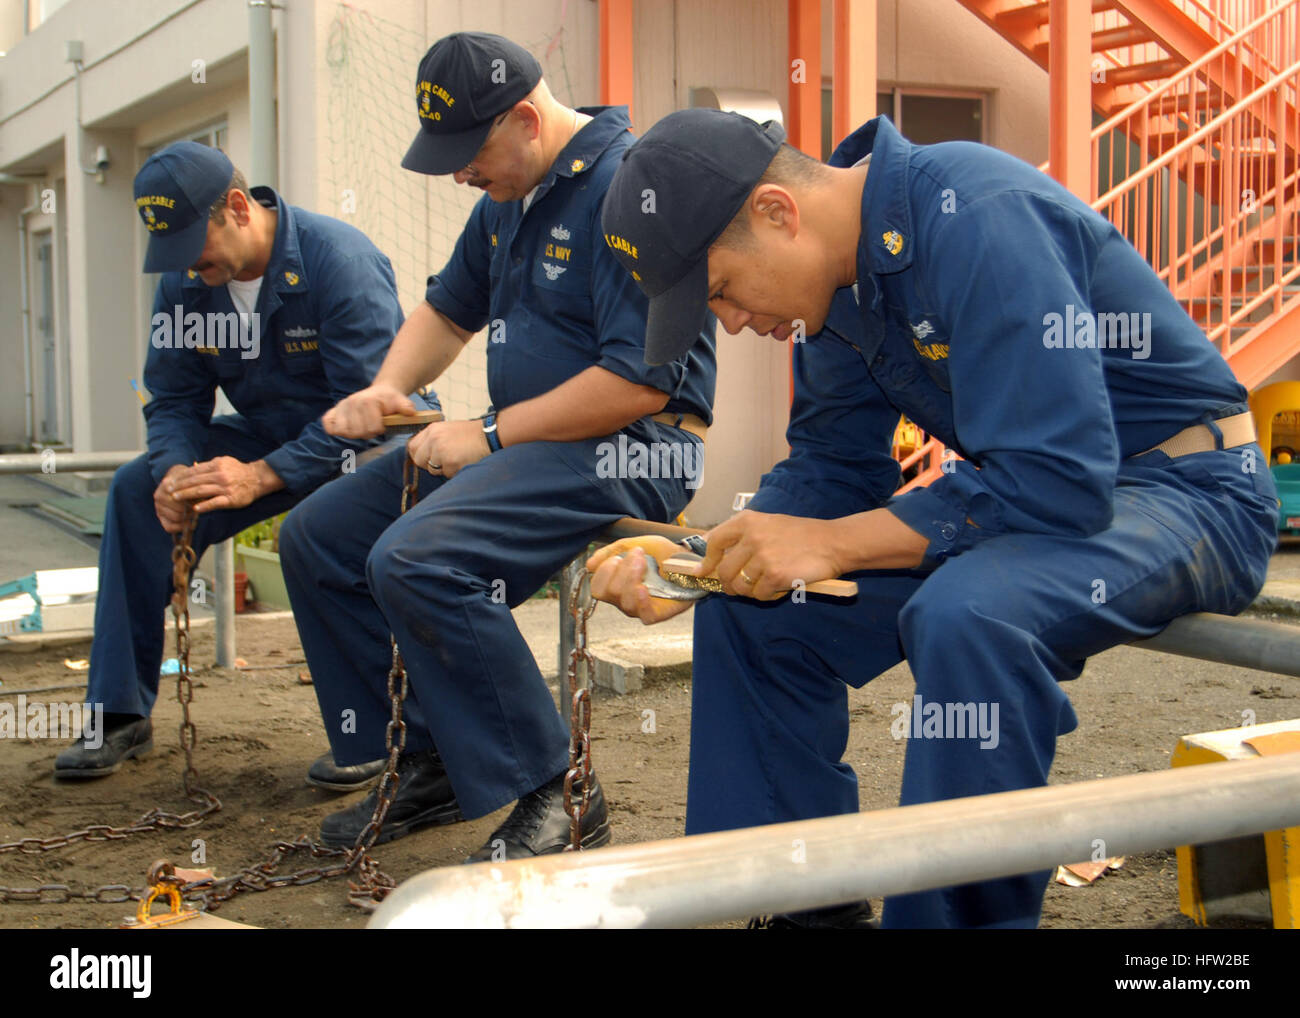 071103-N-5621B-097 YOKOSUKA, Japan (Nov. 3, 2007) Ð Three chief petty officers use wire brushes to clean rust off playground swing chains during a community relations project sponsored by USS Frank Cable (AS 40). The submarine tender is in Yokosuka for a routine port visit. U.S. Navy photo by Mass Communication Specialist 2nd Class Stefanie Broughton (RELEASED) US Navy 071103-N-5621B-097 Three chief petty officers use wire brushes to clean rust off playground swing chains during a community relations project sponsored by USS Frank Cable (AS 40) Stock Photo